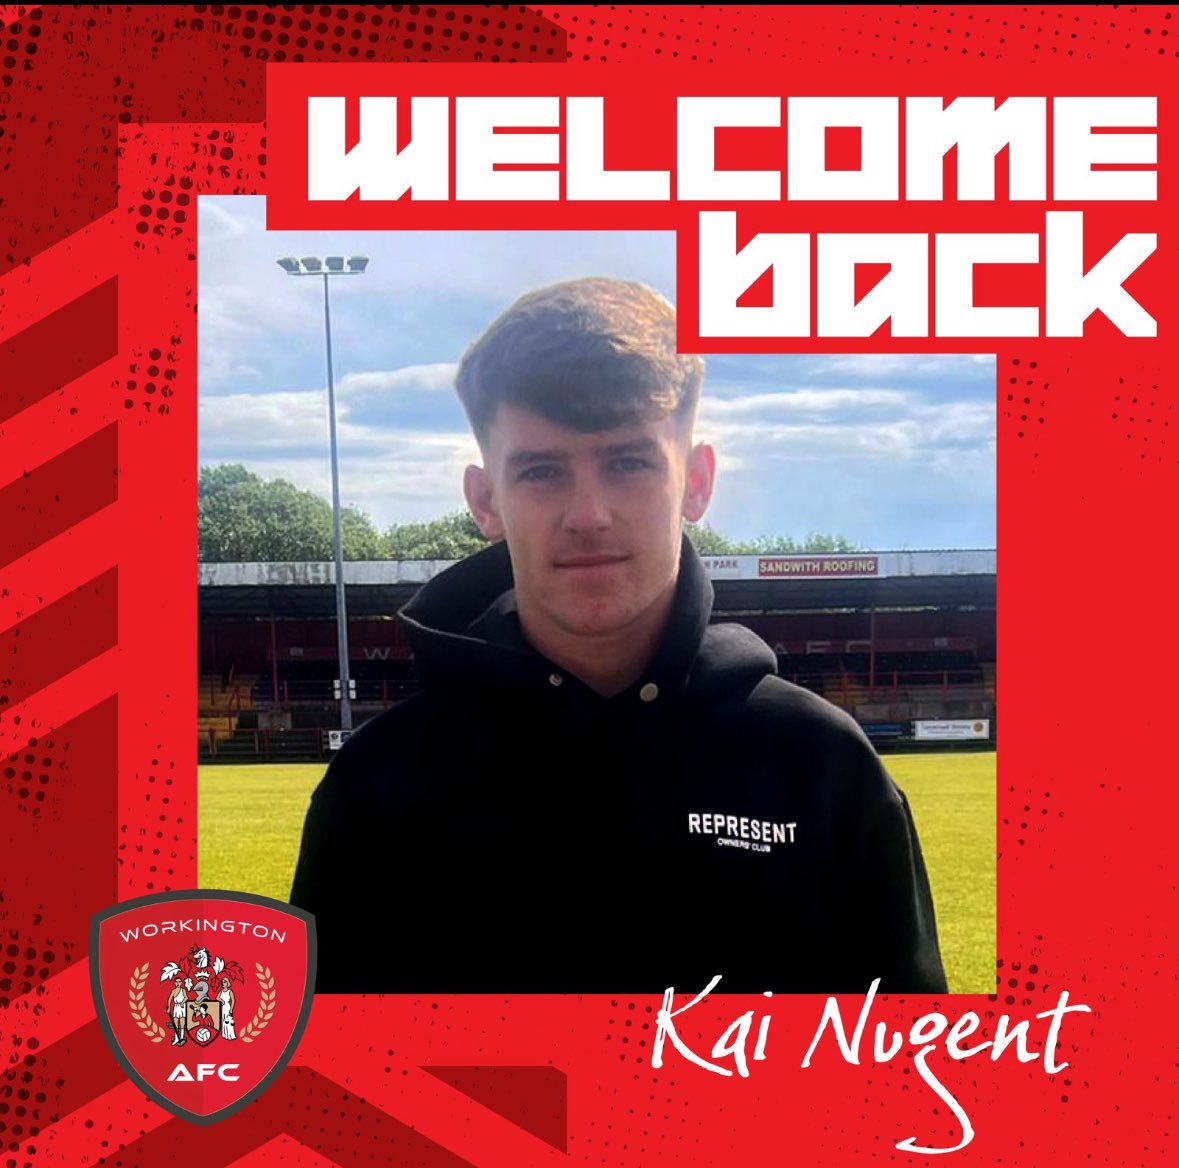 𝗞𝗮𝗶 𝗡𝘂𝗴𝗲𝗻𝘁 𝗥𝗲𝘁𝘂𝗿𝗻𝘀 ✍️ We are delighted to announce the return of Kai Nugent! After a season spent showcasing his talents at Annan Athletic, Kai is coming back to Borough Park! workingtonafc.com/kai-nugent-ret… #WelcomeBackKai #RichHistoryBrightFuture #RedsRiseAgain